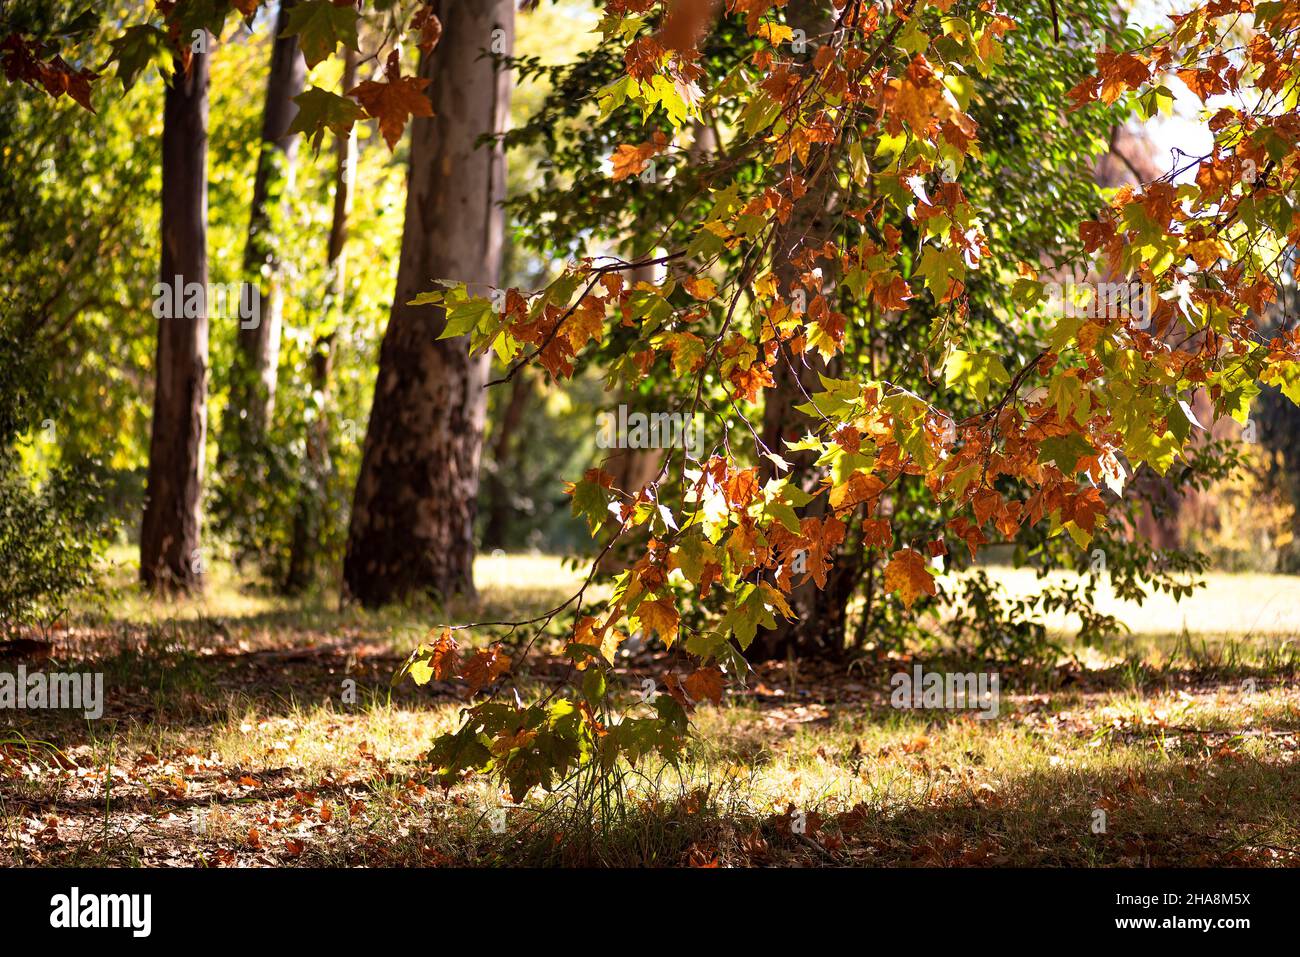 BRANCH OF LEAVES IN AUTUMN. HORIZONTAL. COLOR. Stock Photo